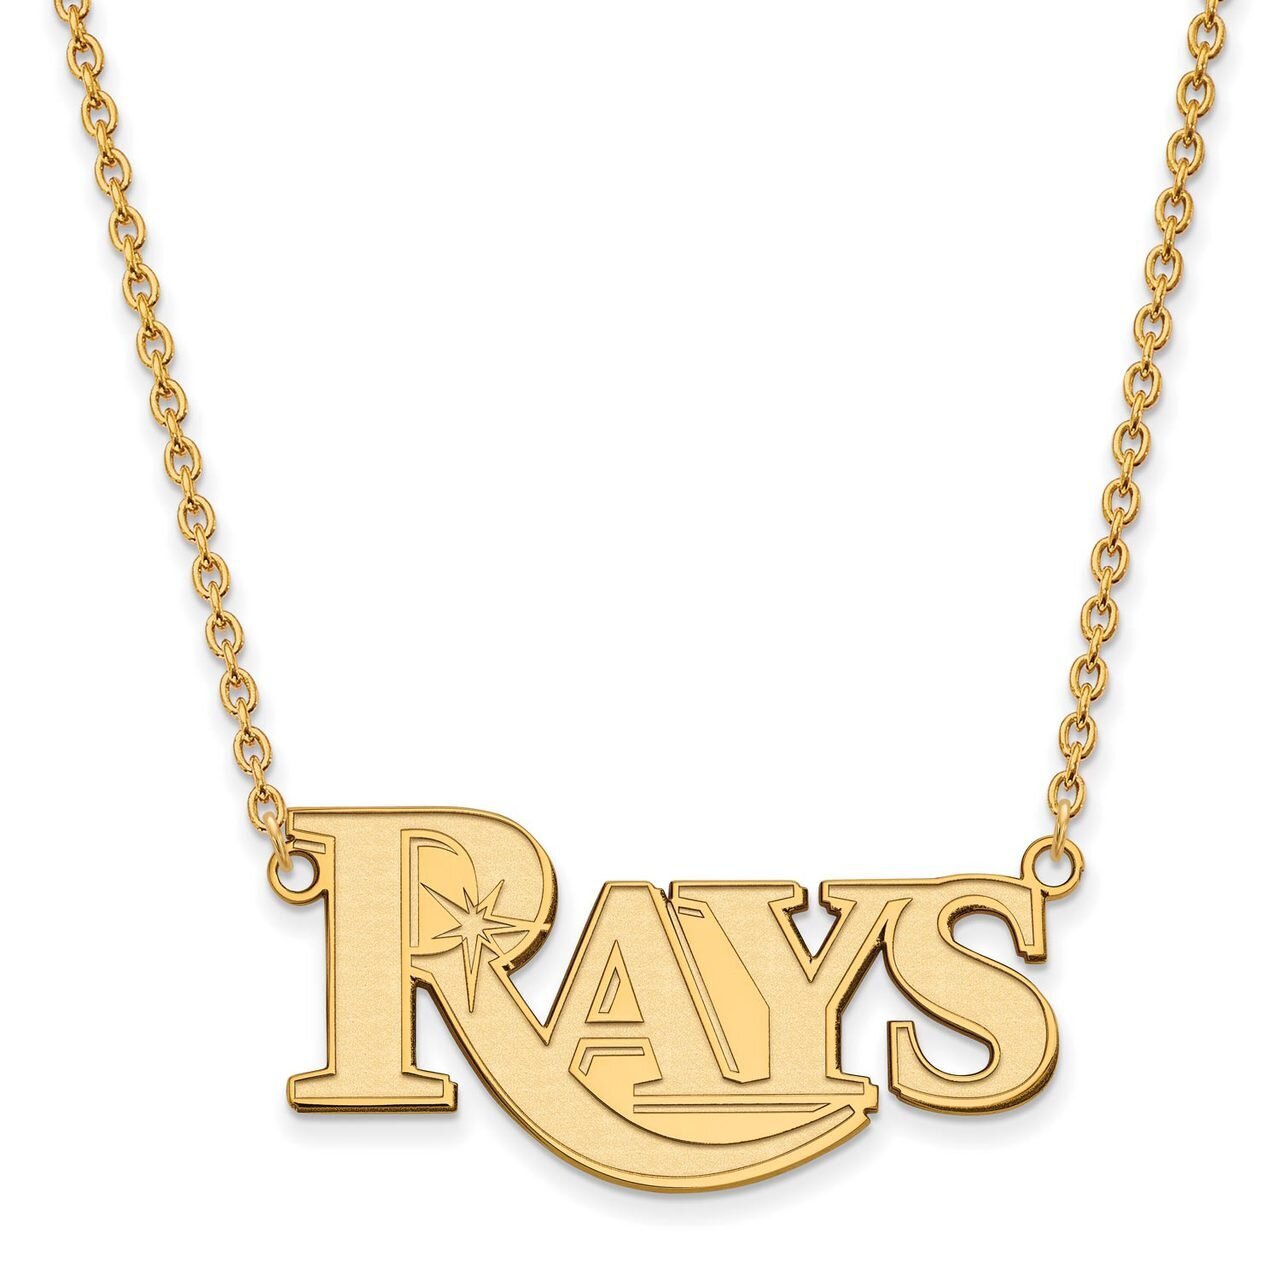 Tampa Bay Rays Large Pendant with Chain Necklace 10k Yellow Gold 1Y019DEV-18